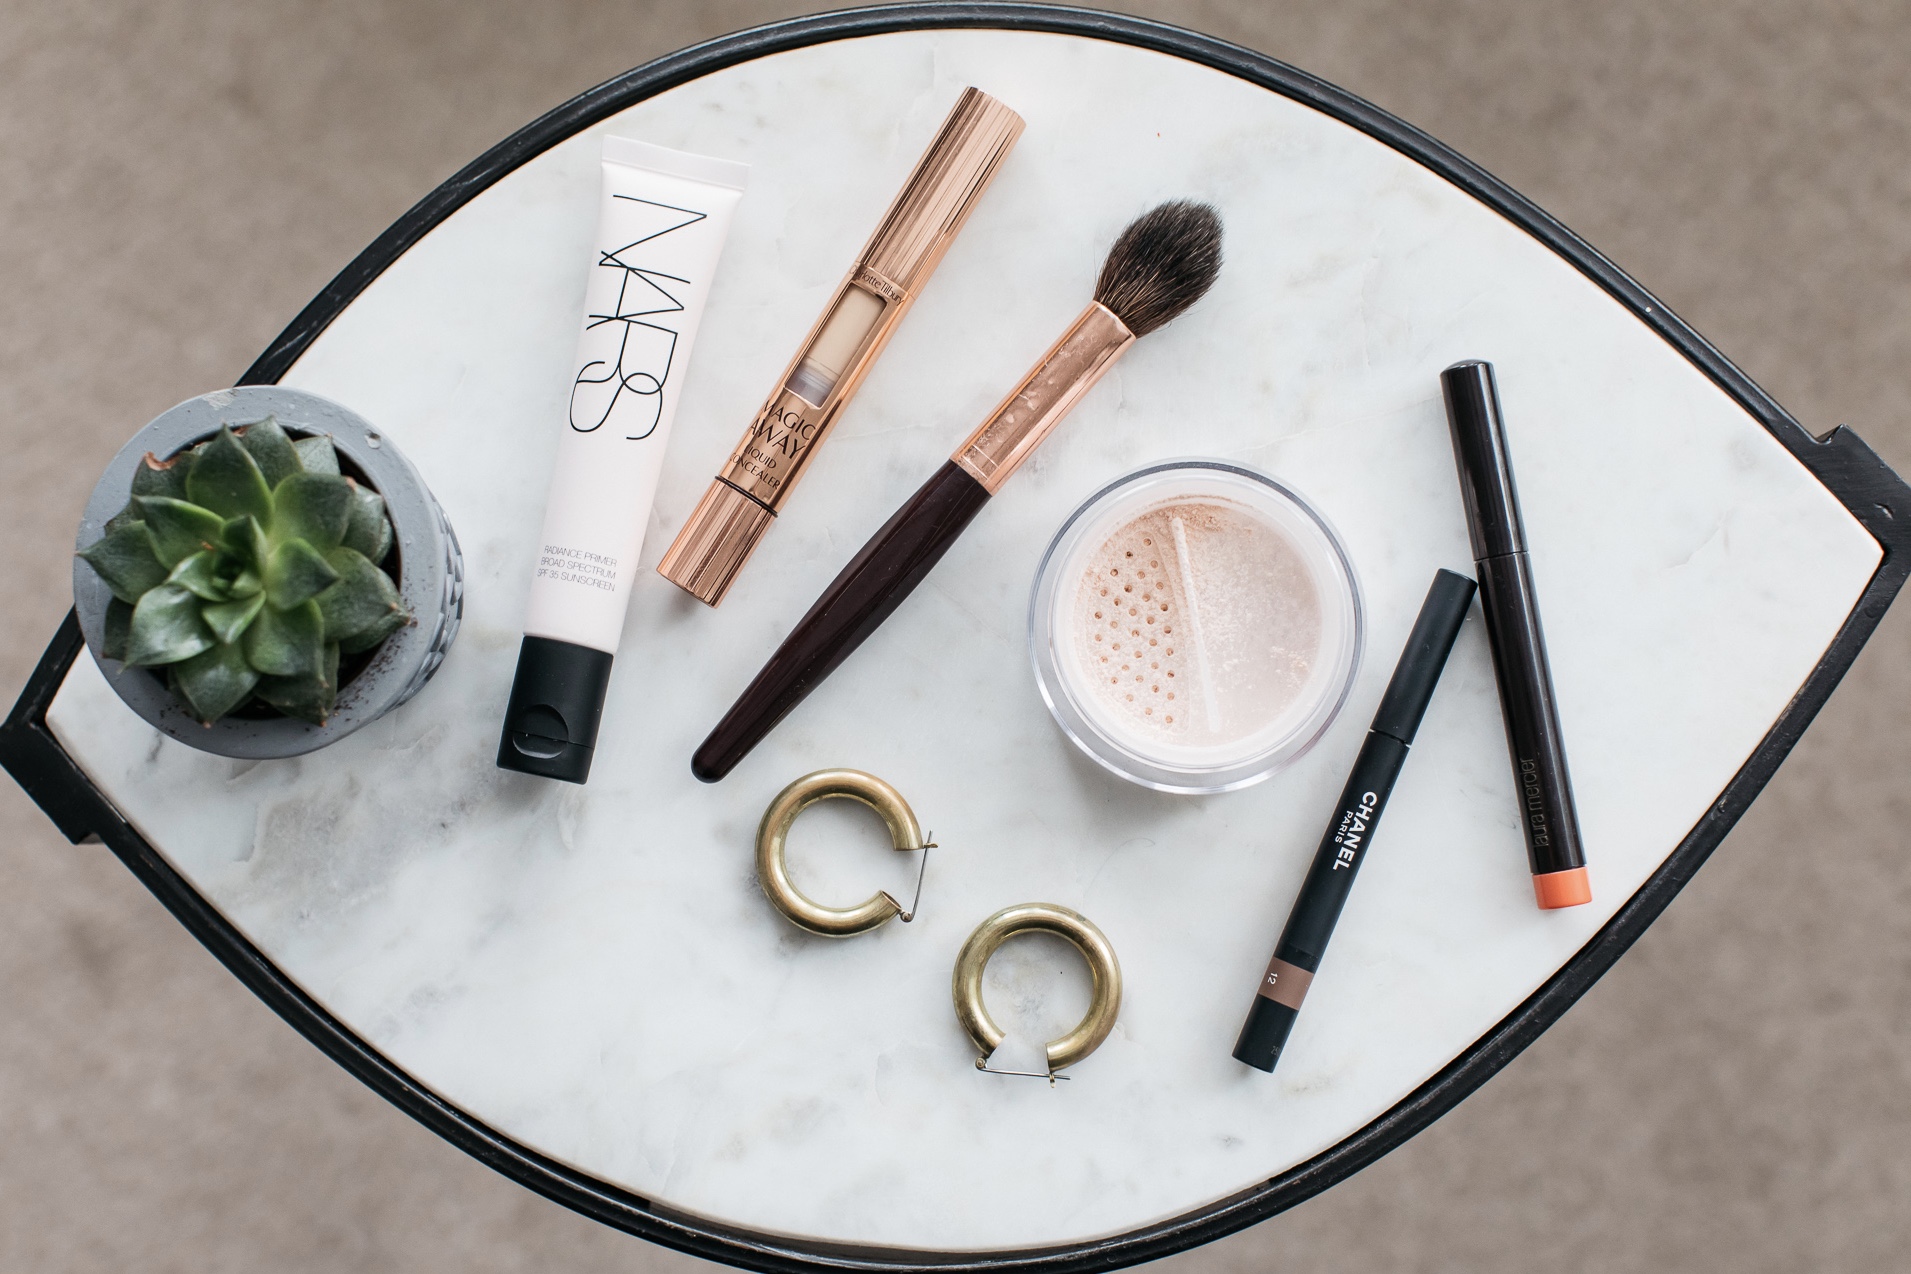 New Beauty Discoveries For Your Consideration – The Anna Edit